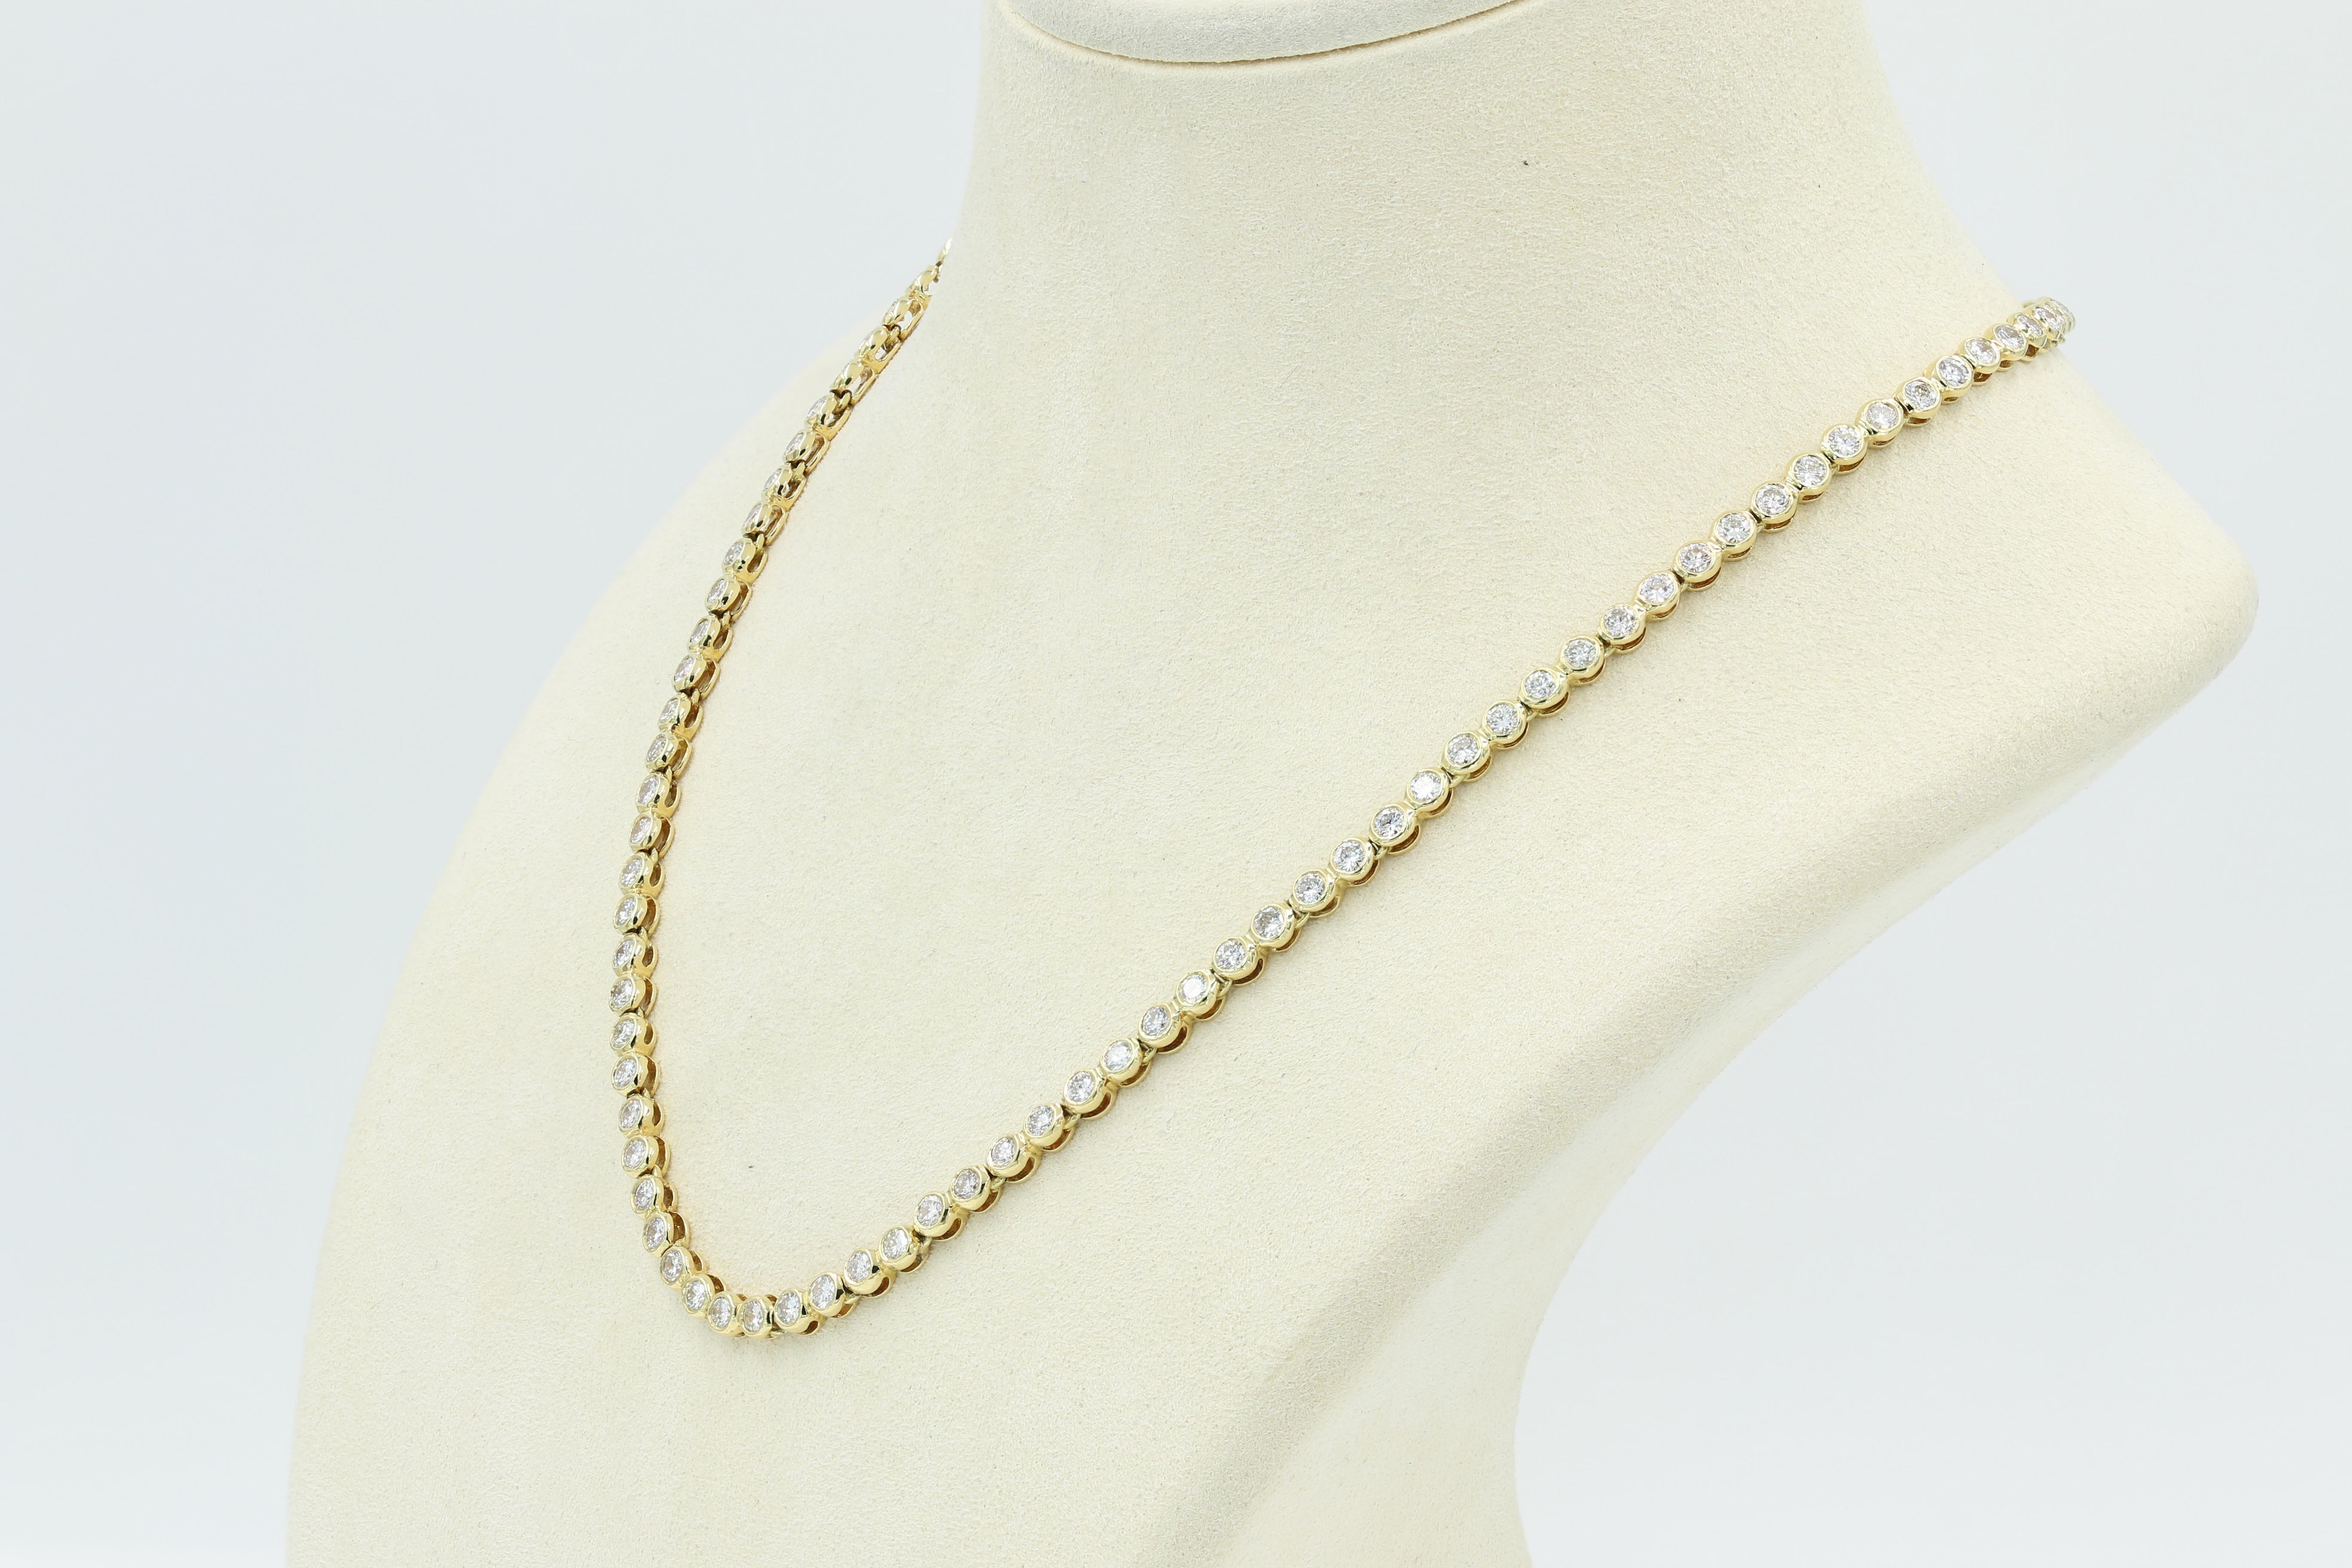 Round Cut 18 Karat Gold Diamond Riviera Necklace with Approximately 7.00 Carat Total